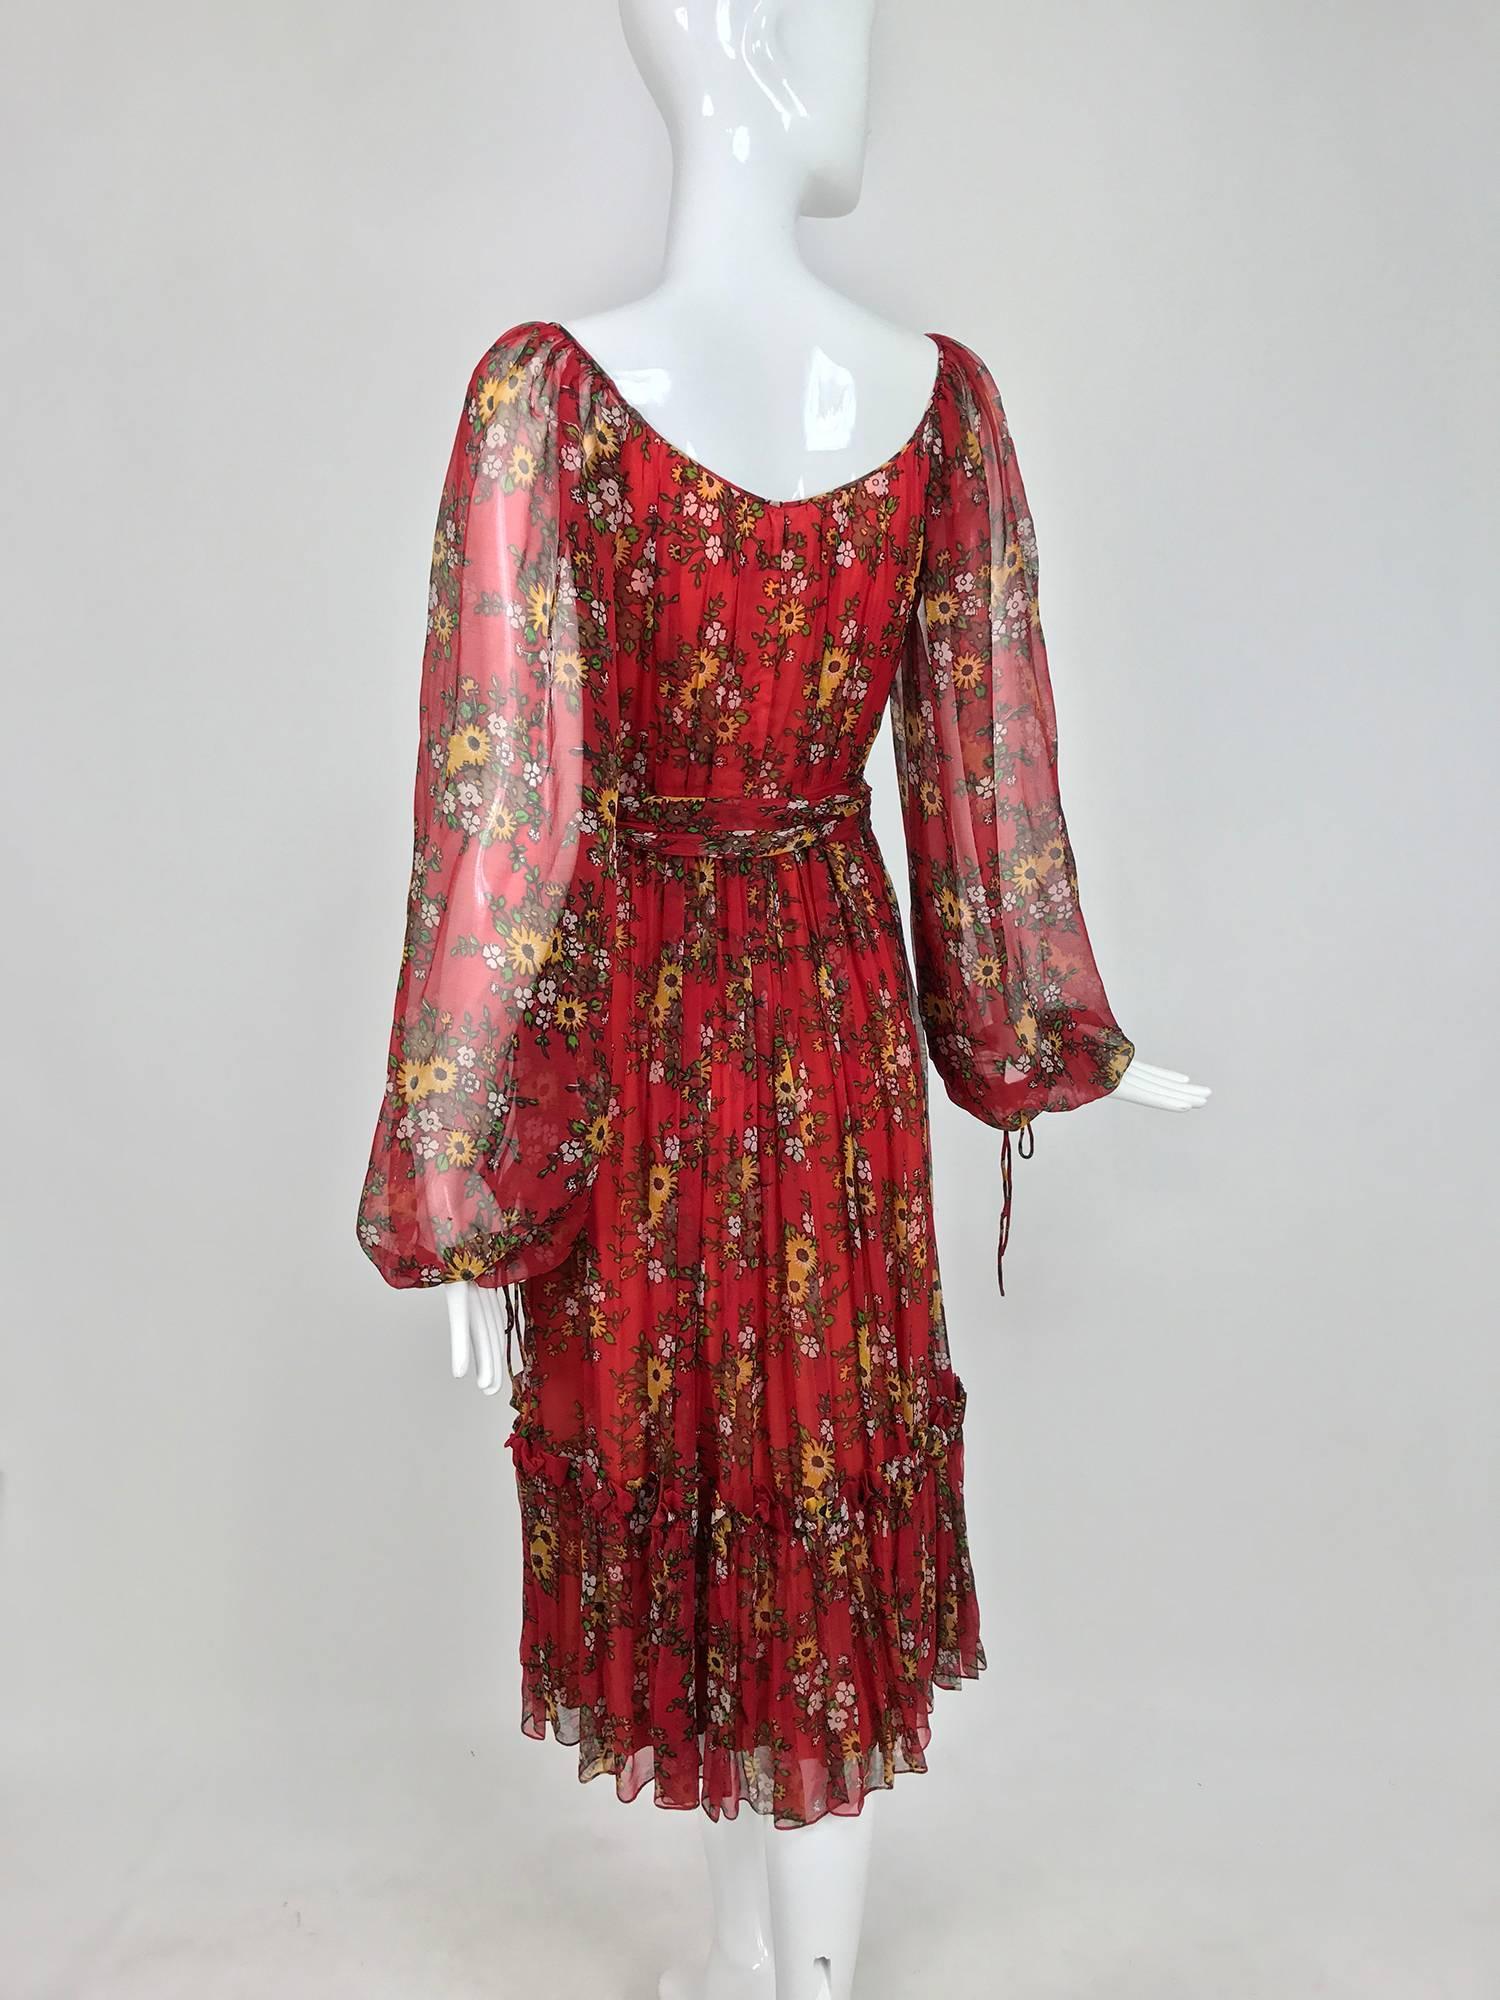 Vintage House of Arts India sheer silk floral print peasant dress 1970s In Good Condition For Sale In West Palm Beach, FL